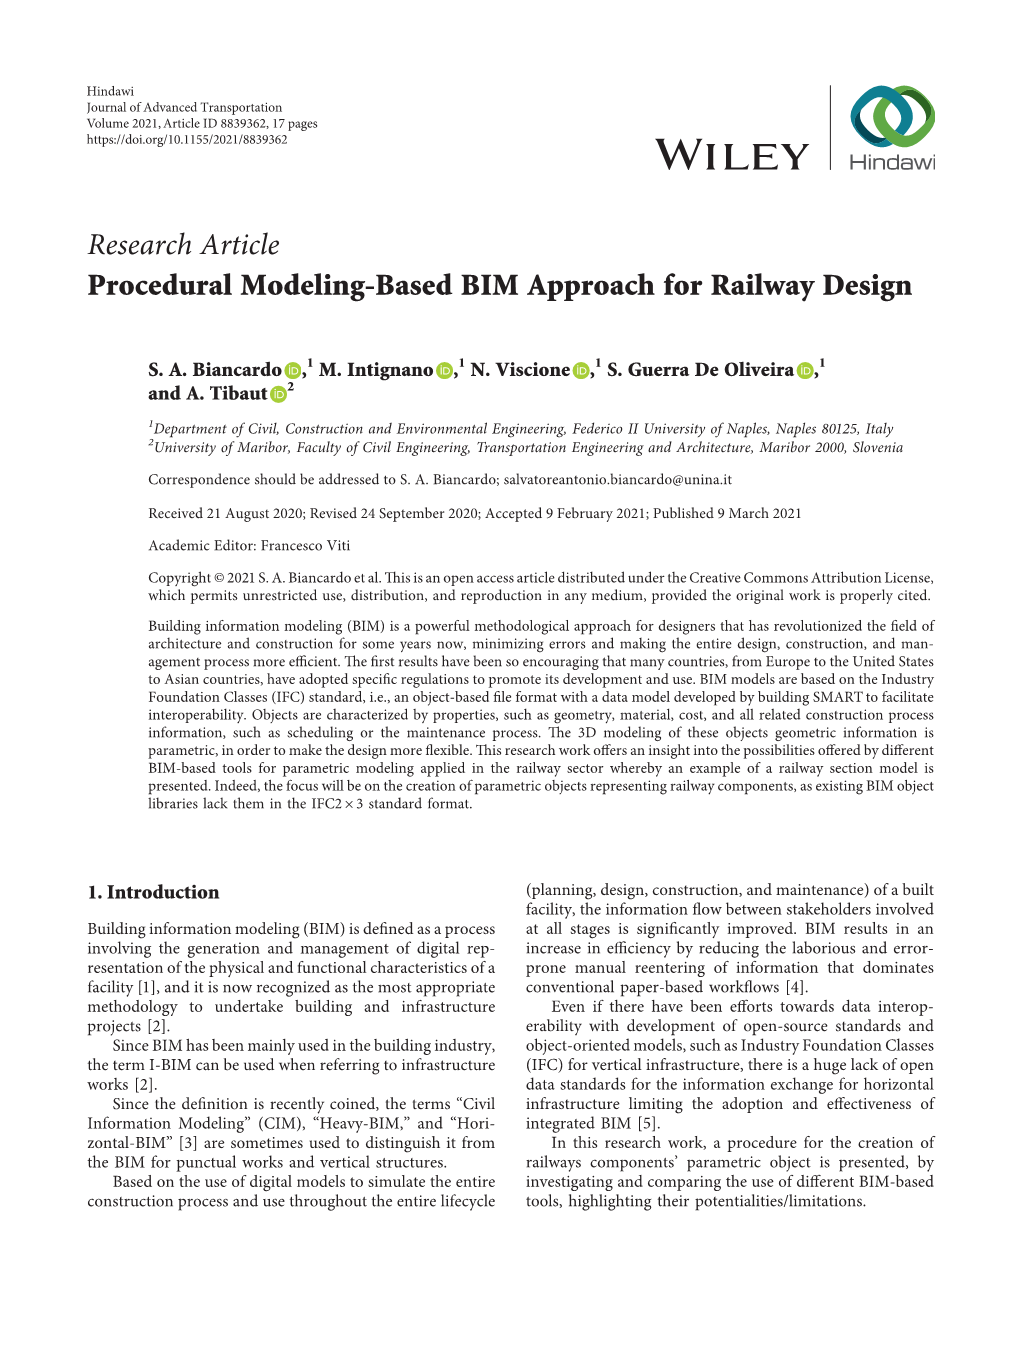 Research Article Procedural Modeling-Based BIM Approach for Railway Design